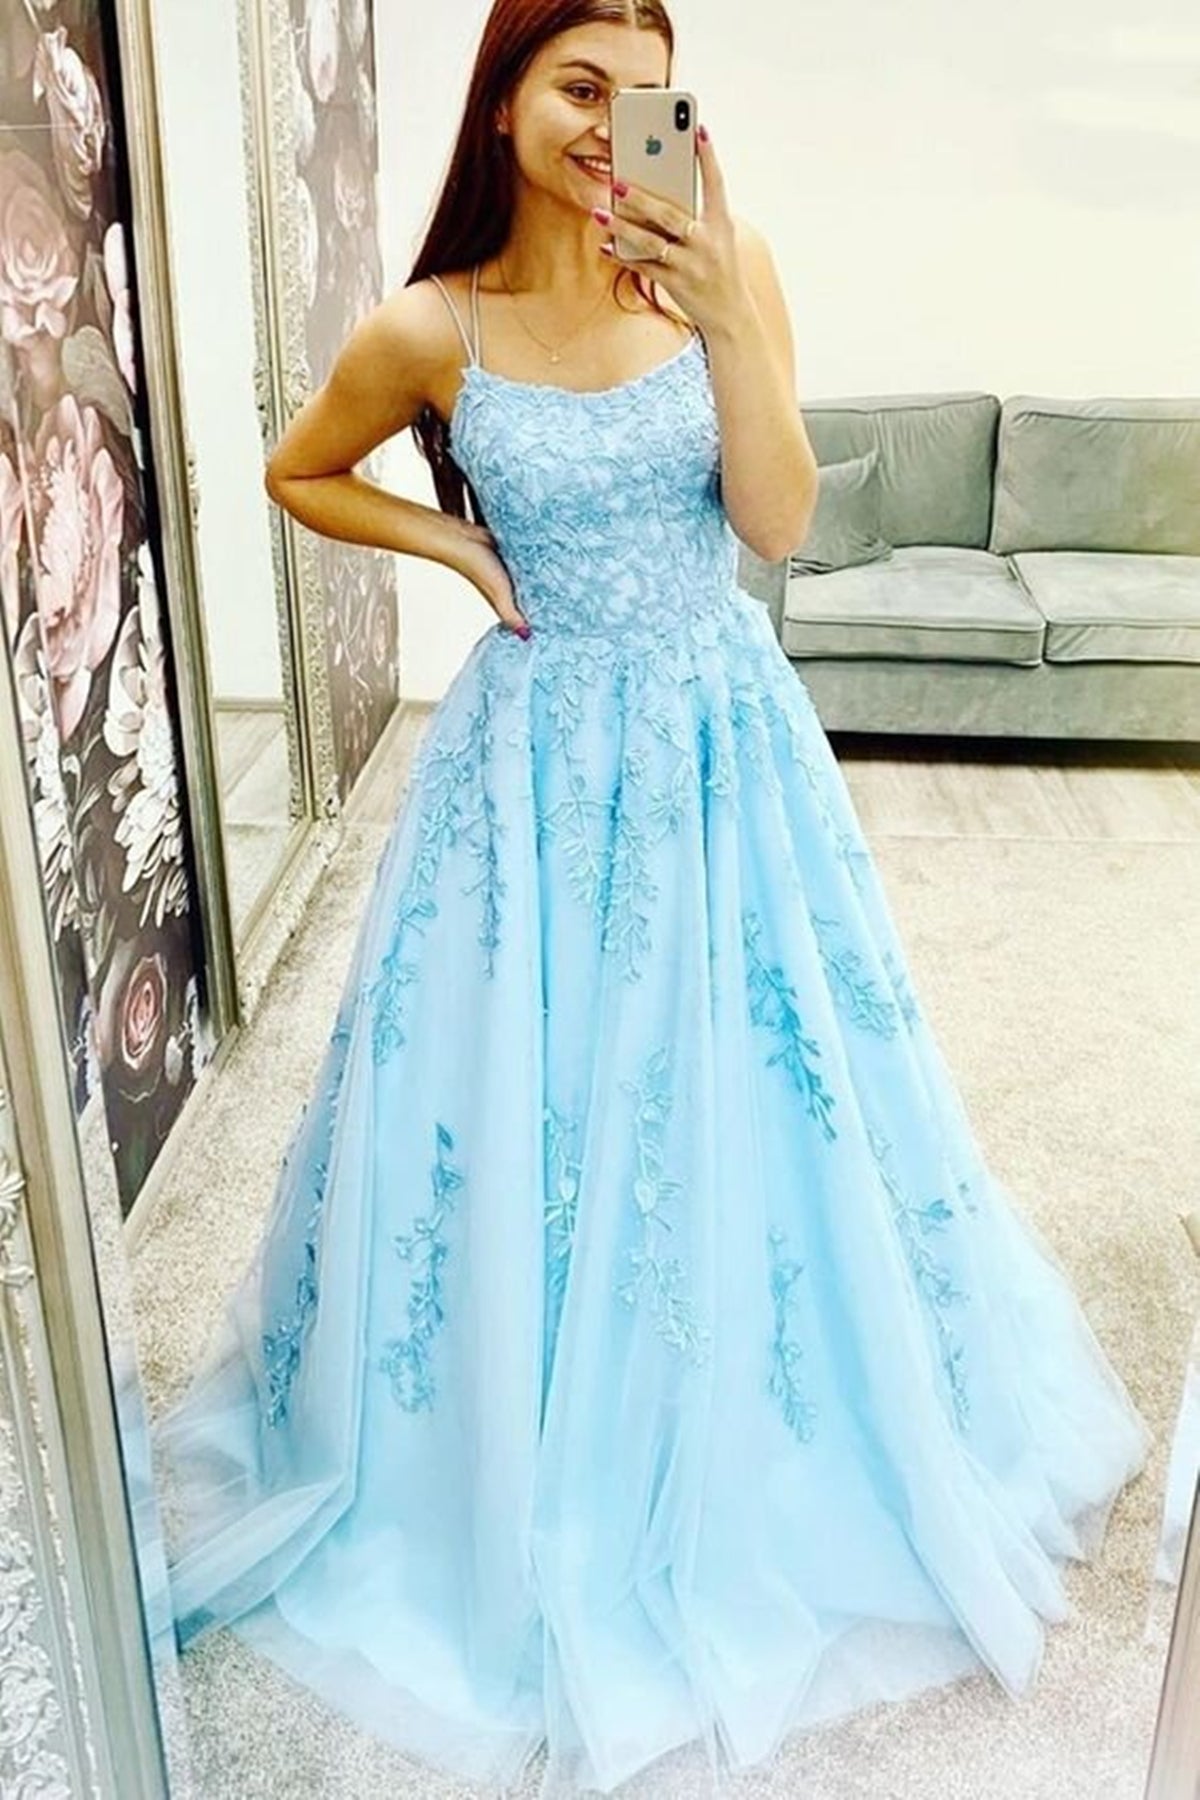 Baby Blue Lace Tulle Long Prom Dresses Beaded Blue Lace Formal Evening Dresses